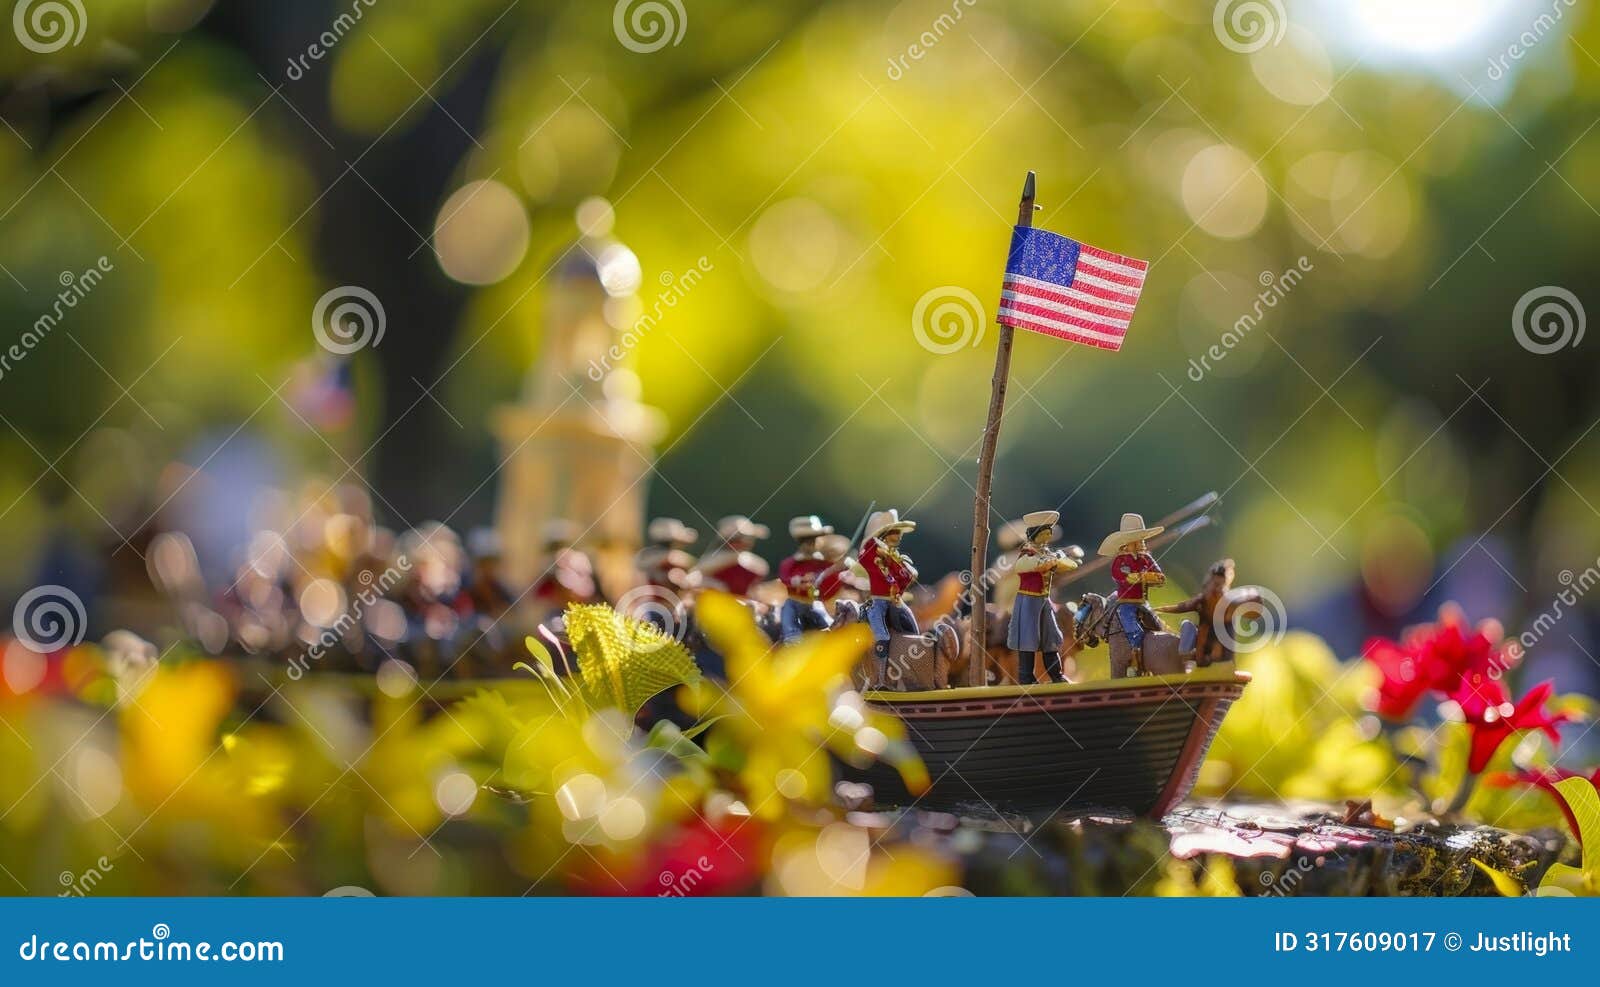 a float carrying a replica of the san jacinto monument commemorating the decisive battle in texas fight for independence